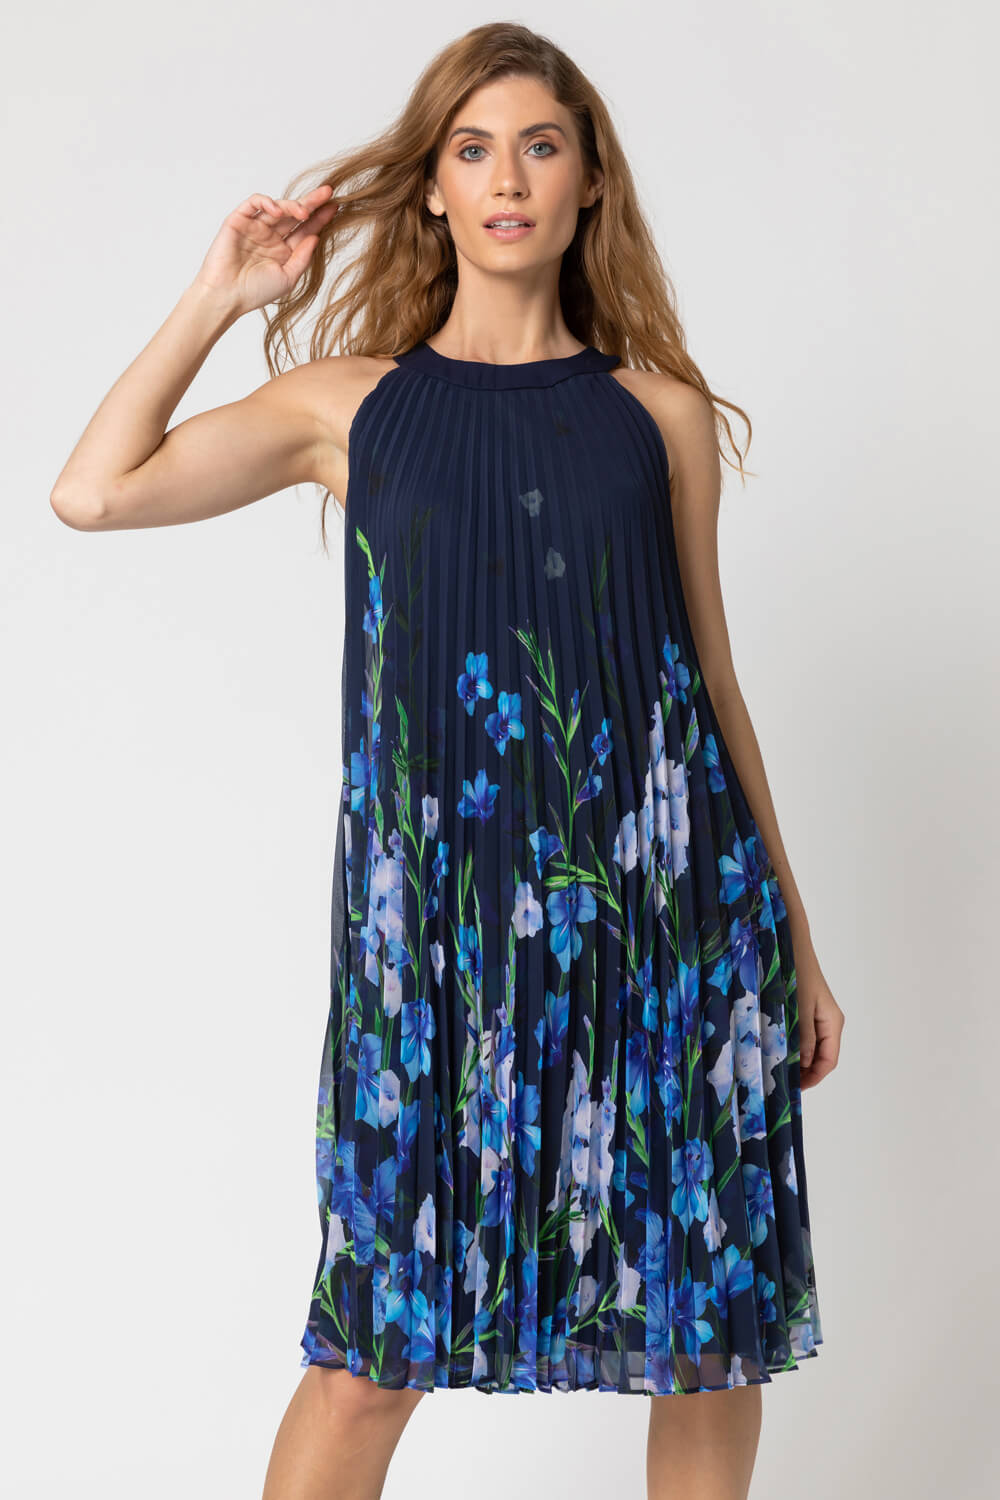 Blue High Neck Floral Pleated Swing Dress, Image 3 of 4